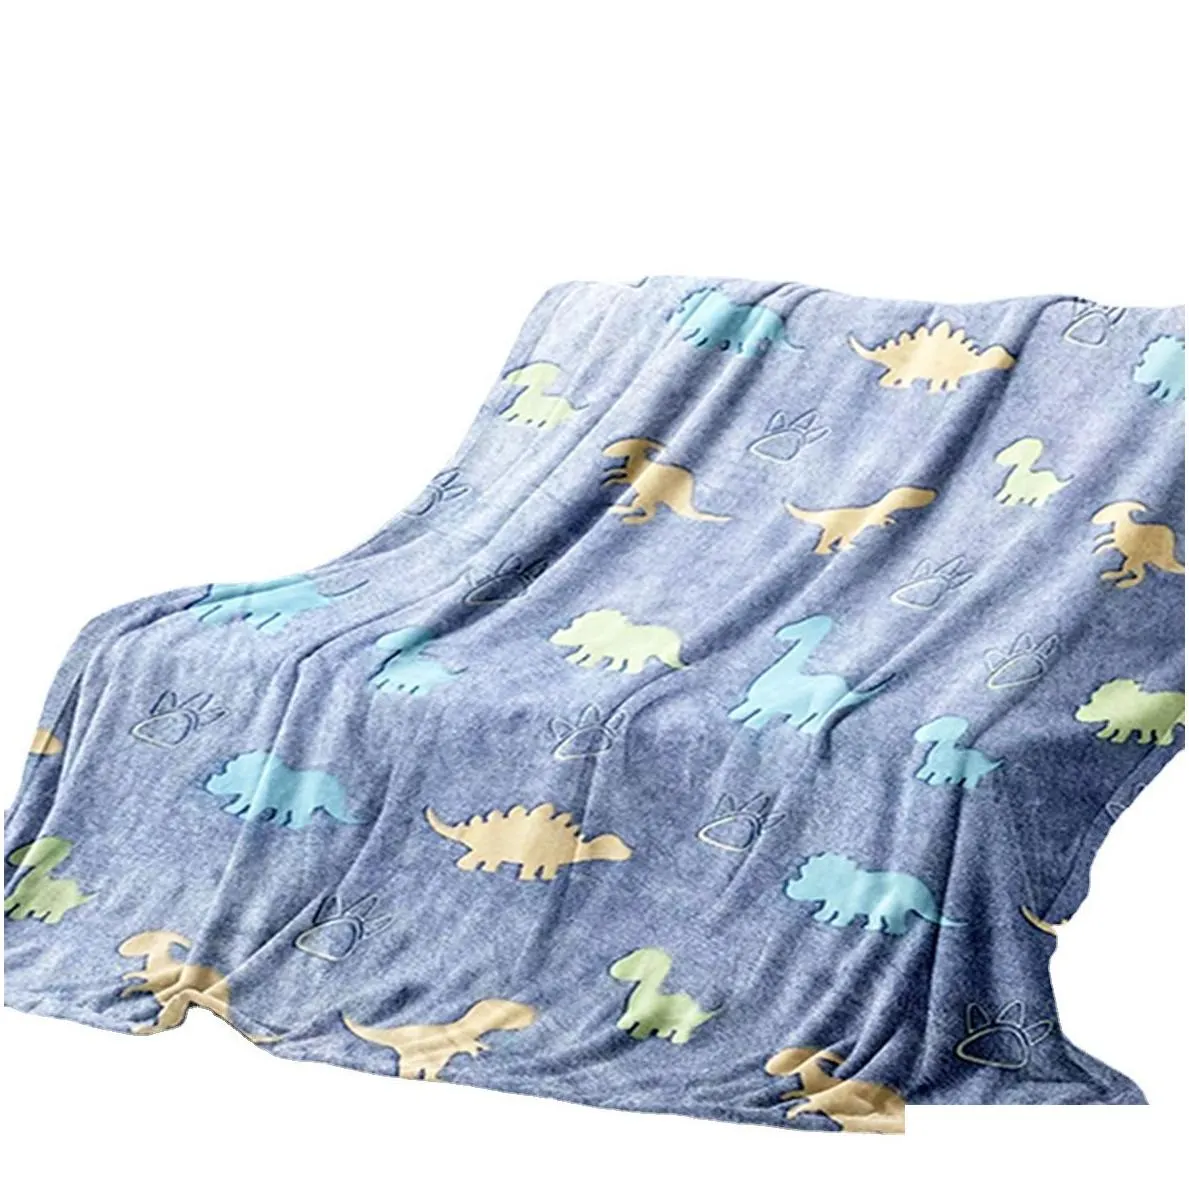 Blanket 1Pc Glow In The Dark P Throw Soft And Cozy Flannel For Bed Sofa Office Birthday Thanksgiving Gift Drop Delivery Dhy5U